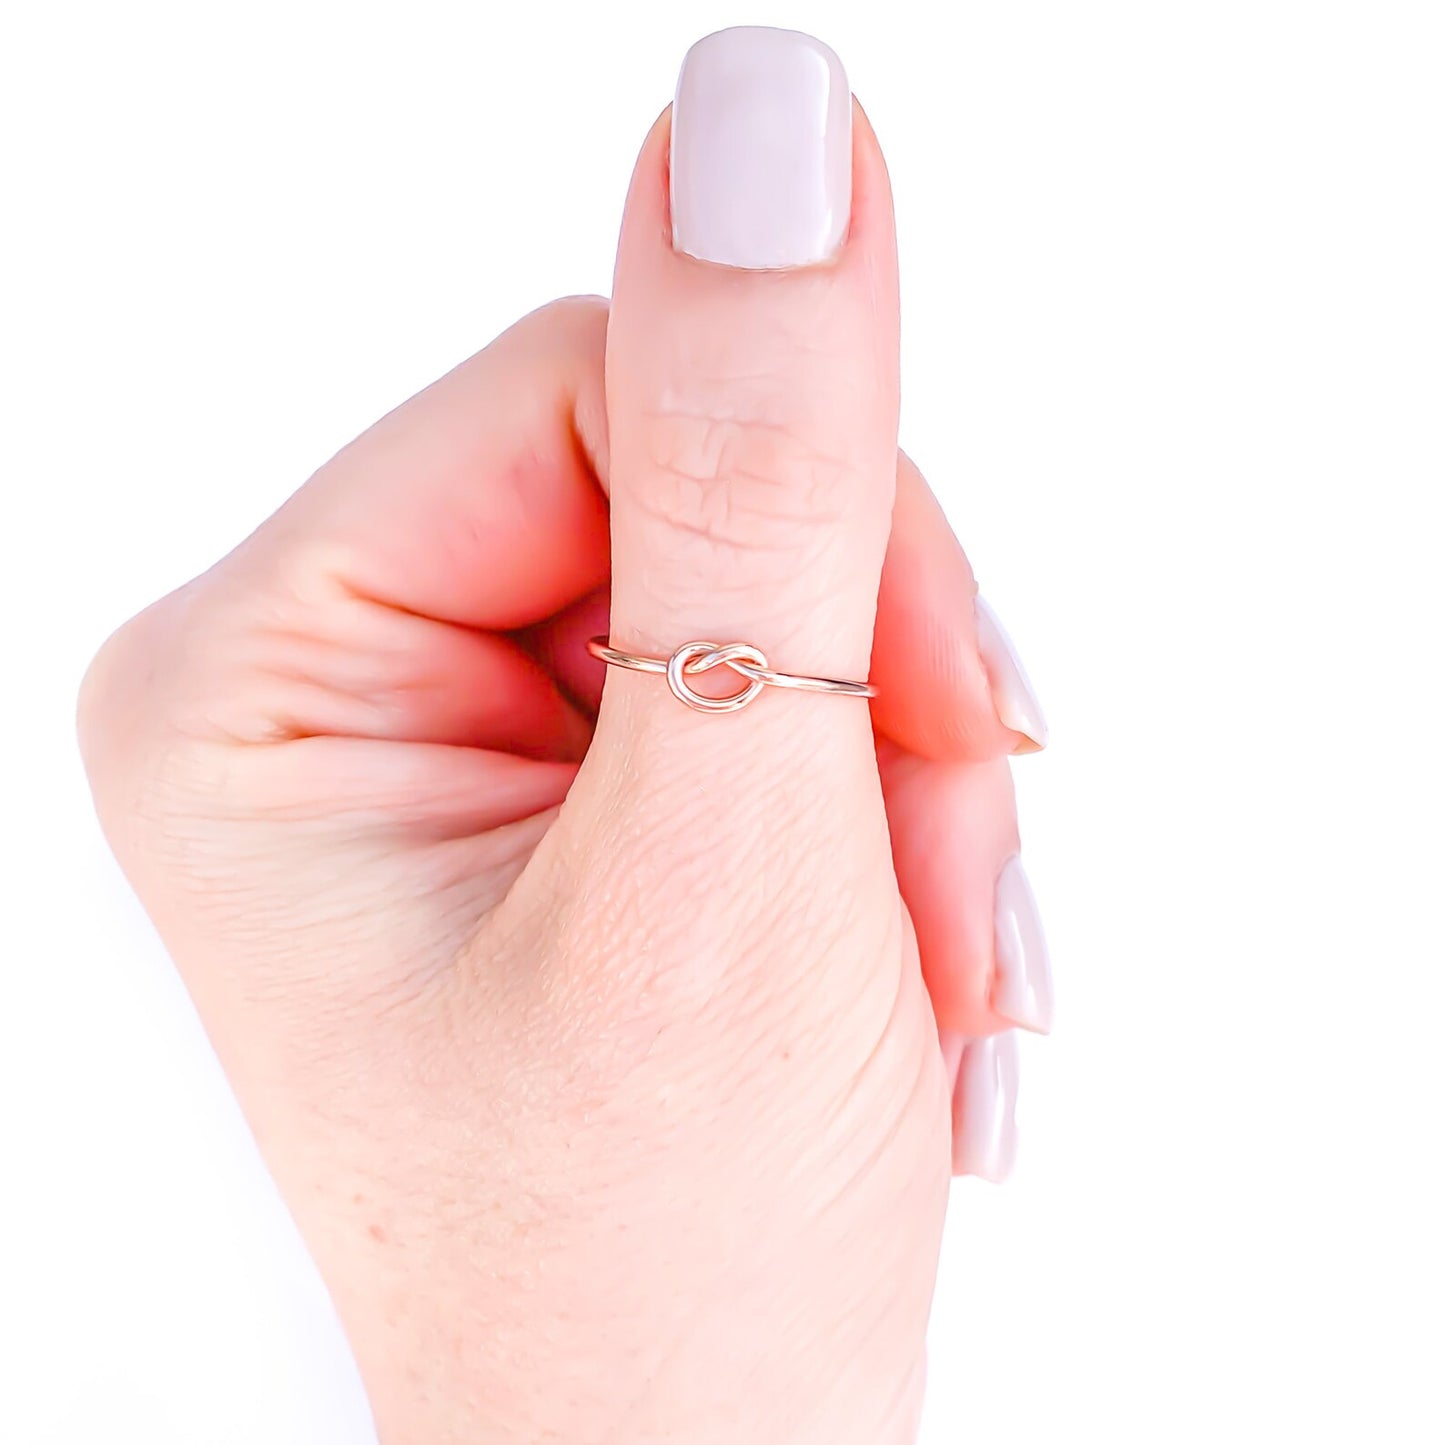 Dainty Knot Ring